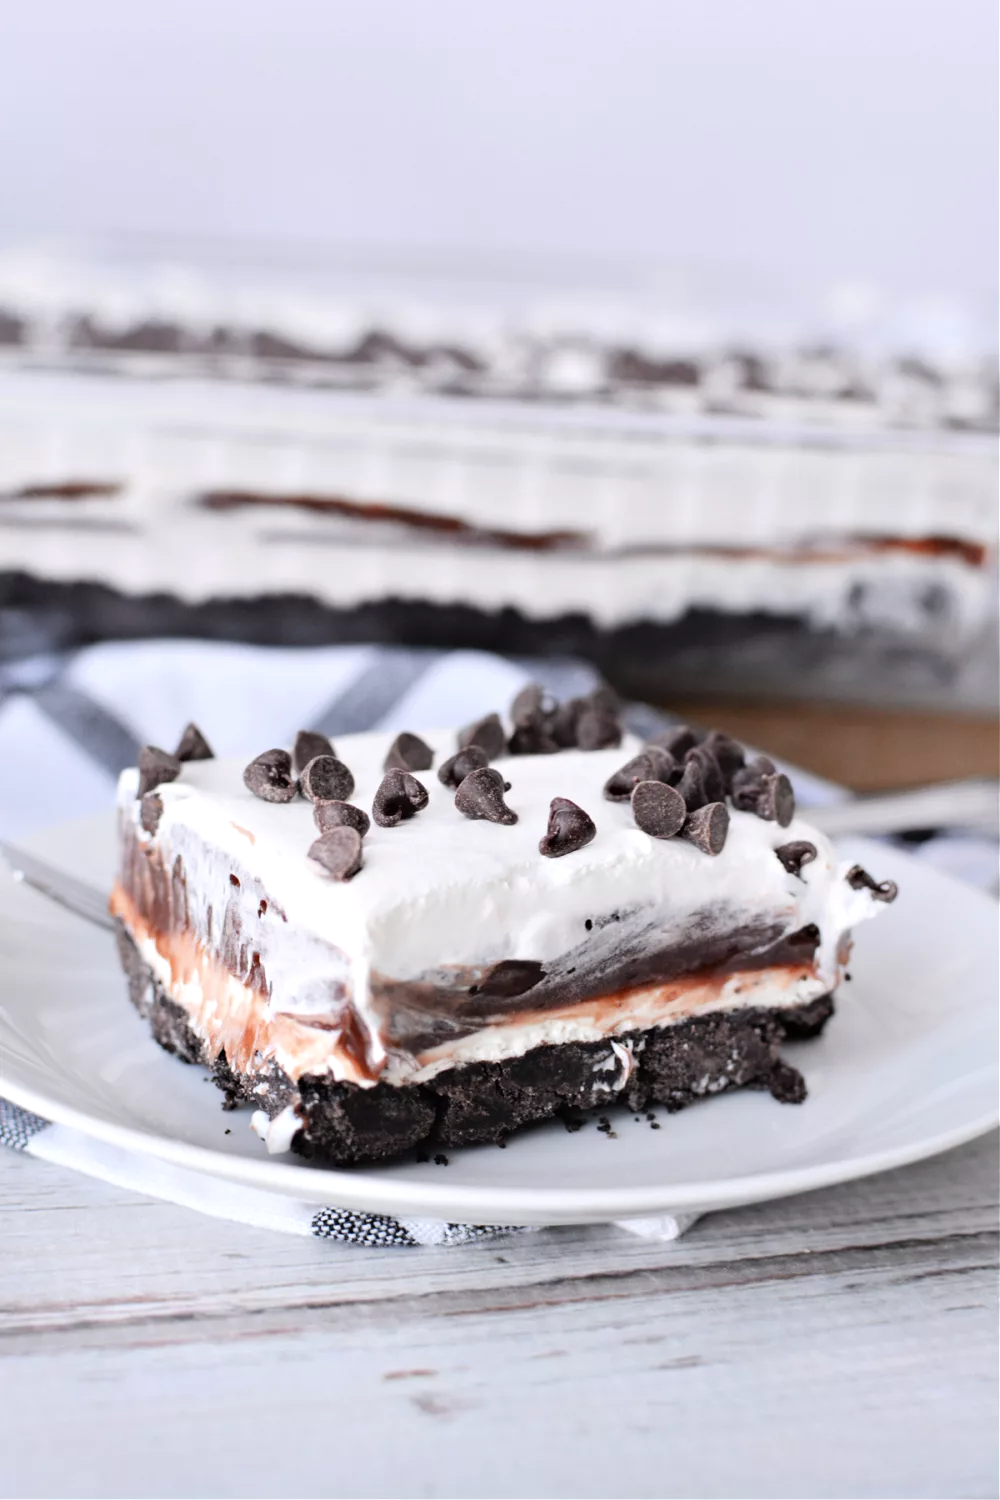 Chocolate Lasagna layer cake with whipped topping and chocolate chips on top